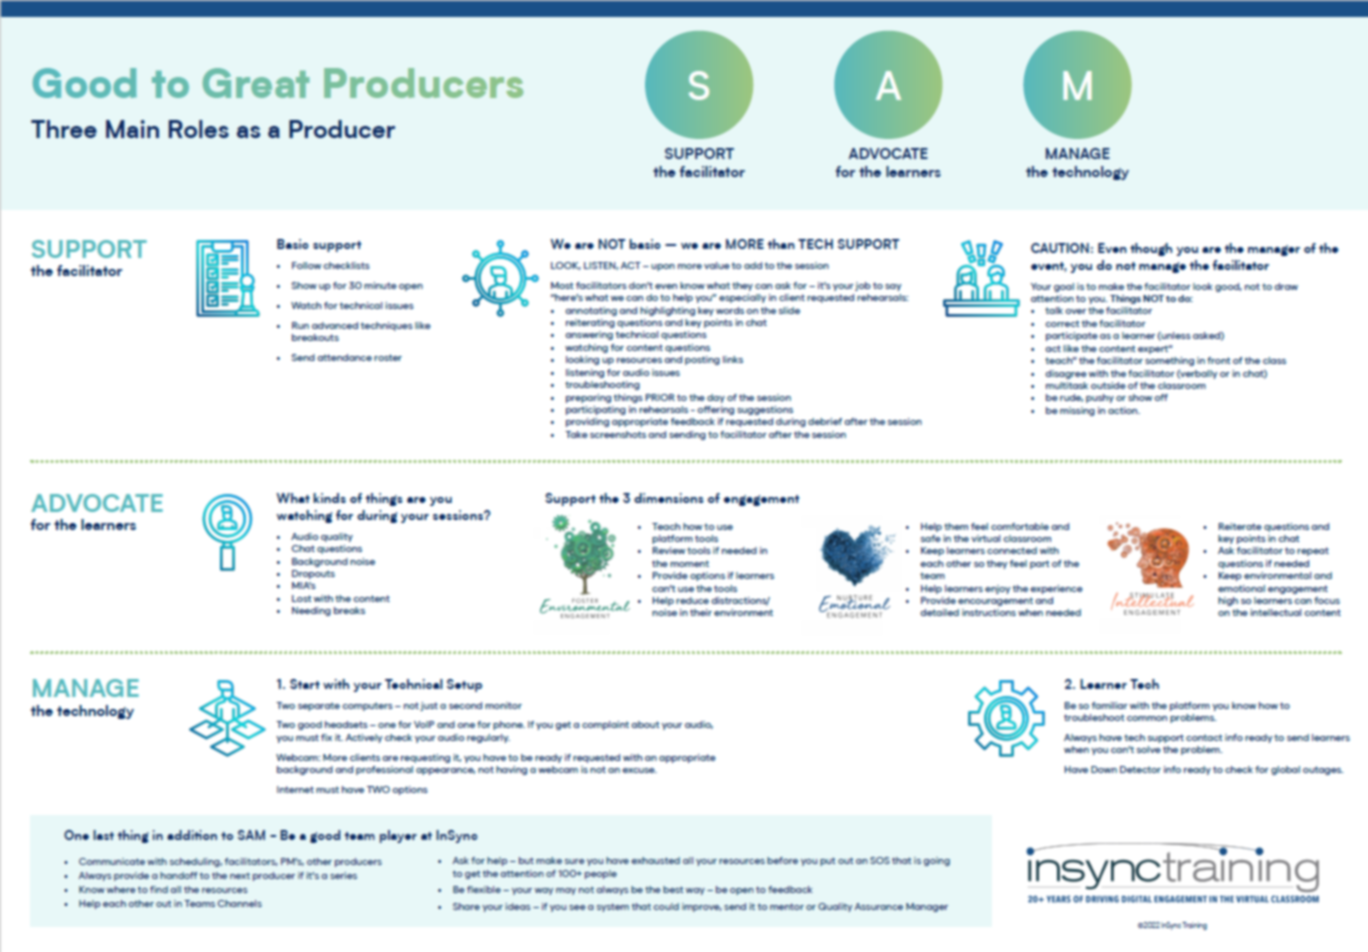 [Infographic] The Difference Between Good & Great Producers